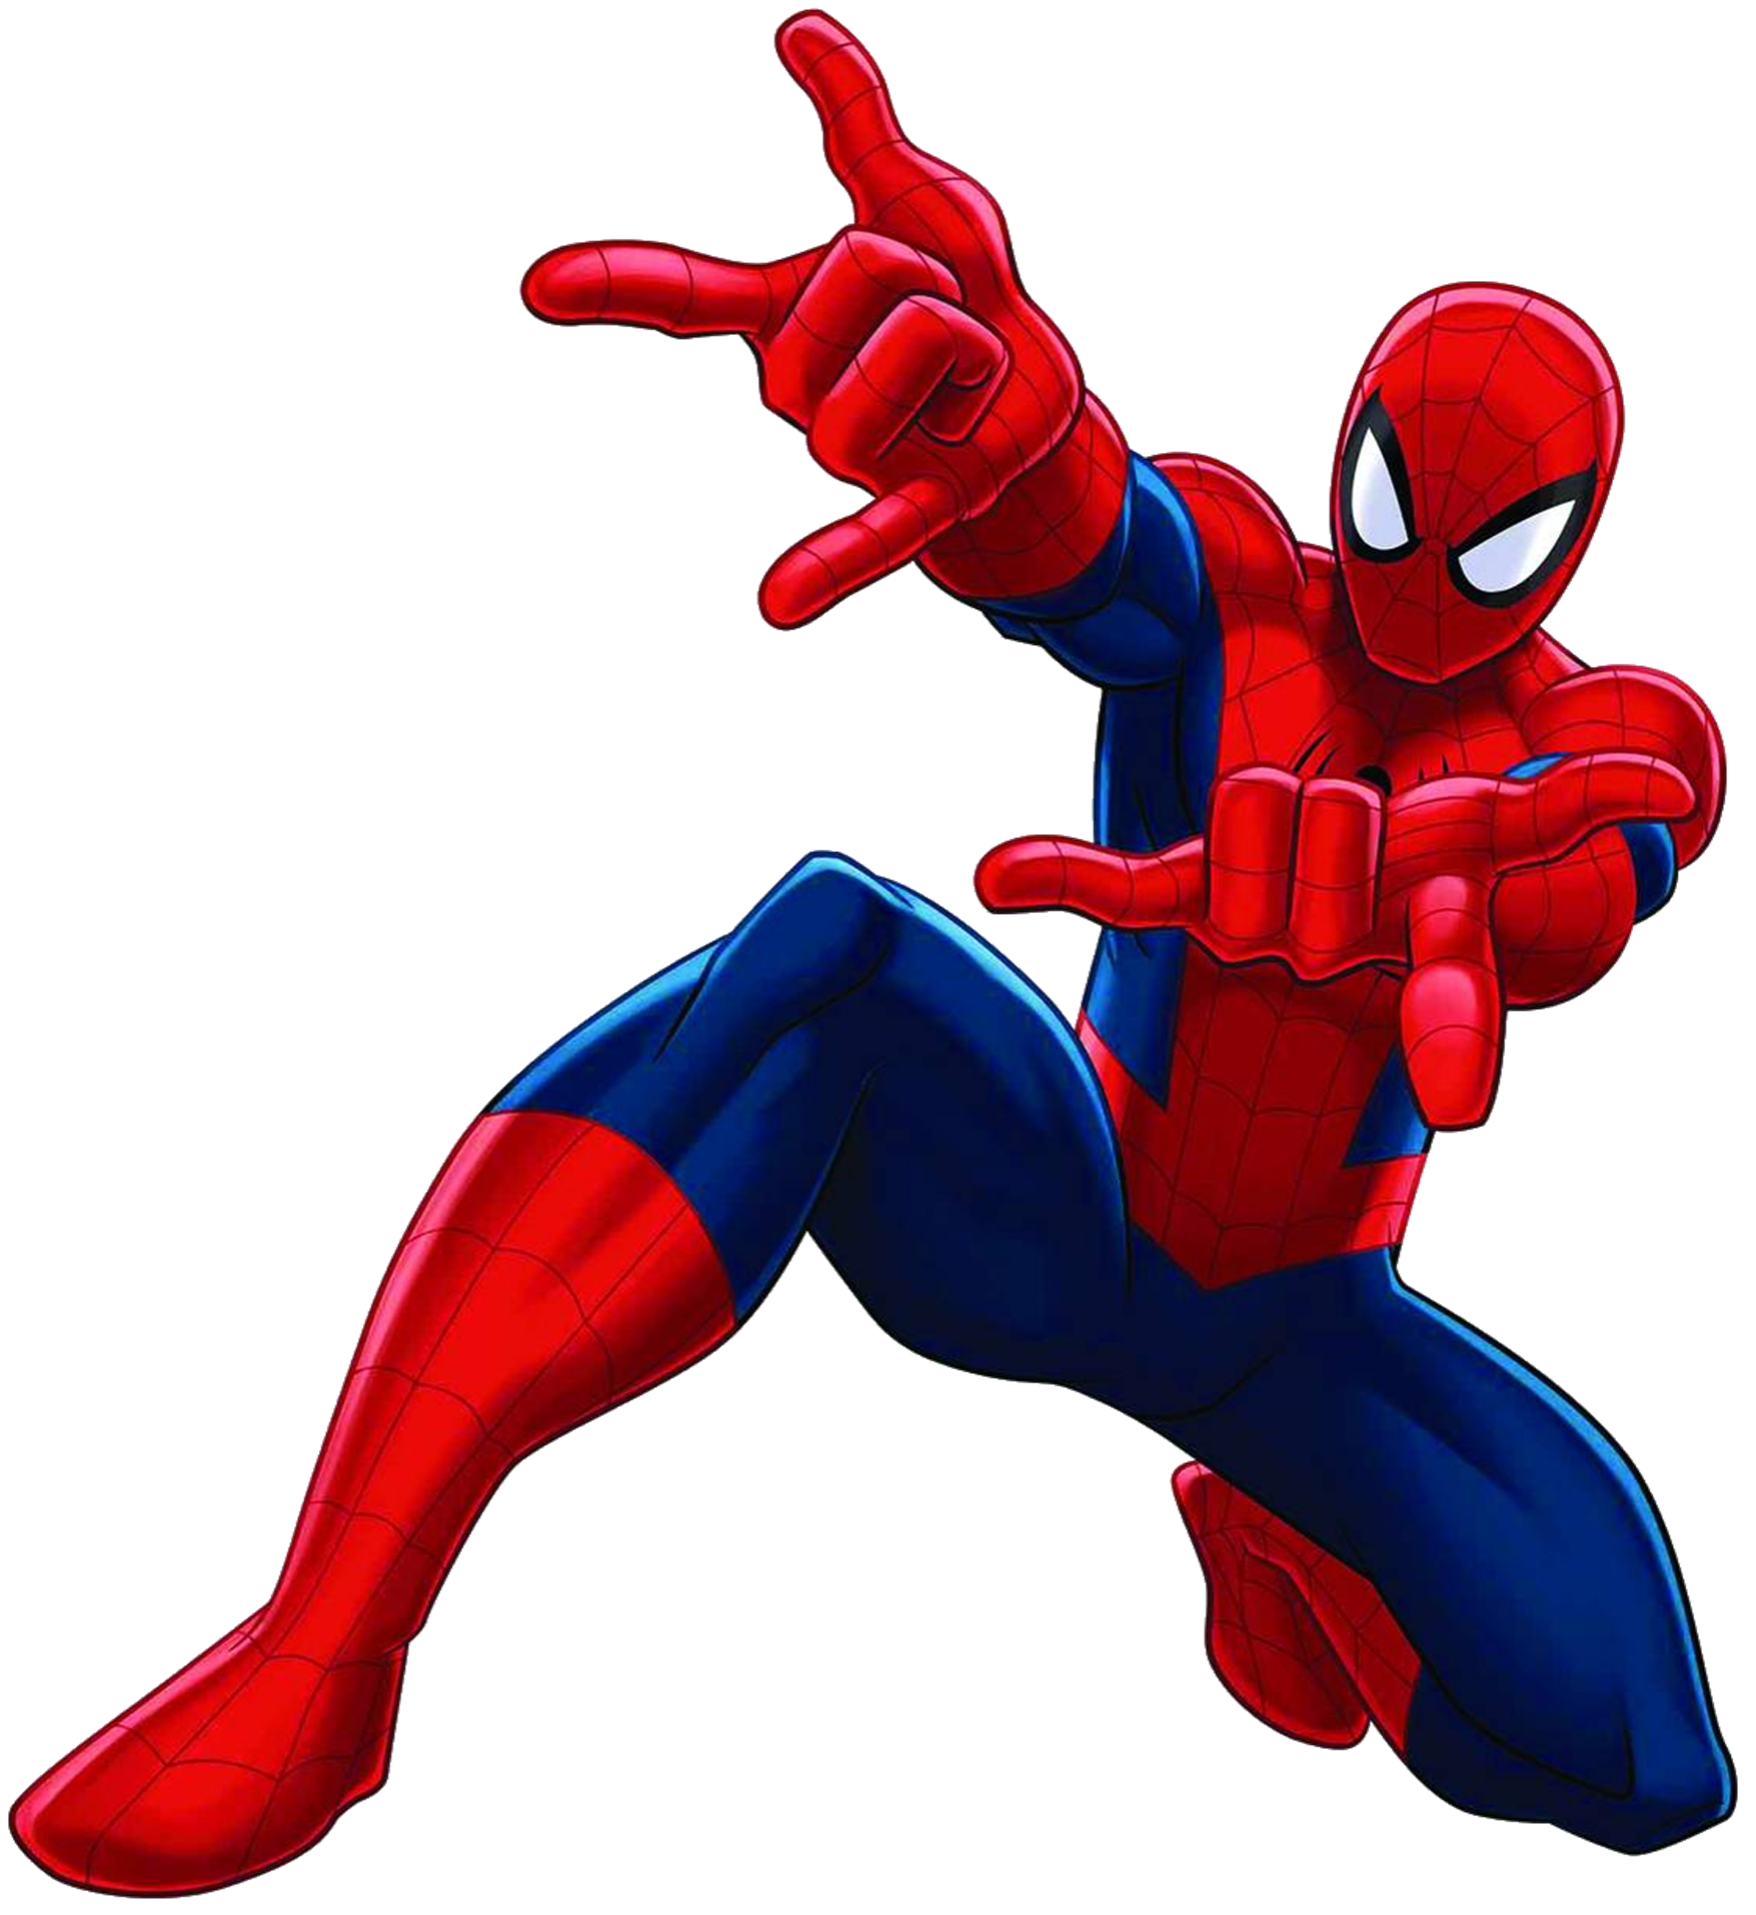 Spiderman cartoon costume pictures free icons and png